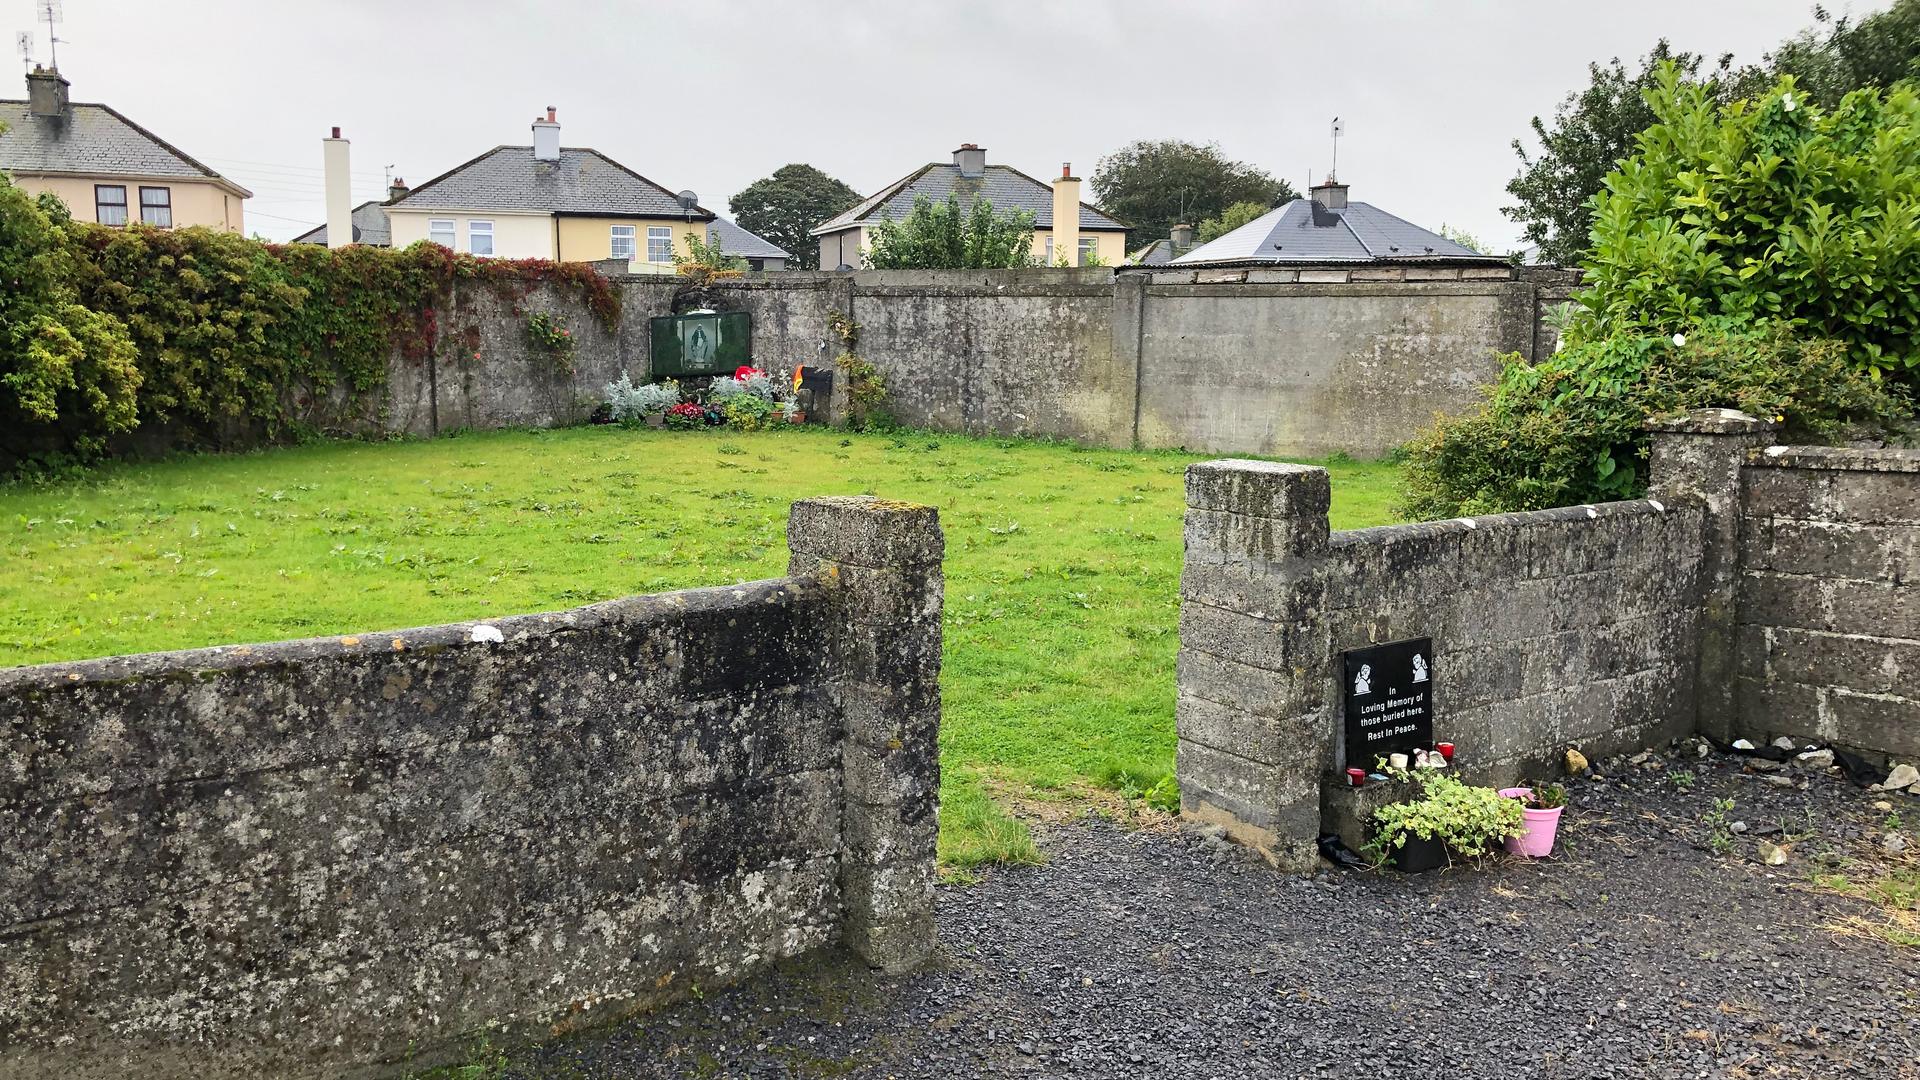 View of the mass grave at the Bon Secours mother-and-baby Home, Tuam County Galway Republic of Ireland.